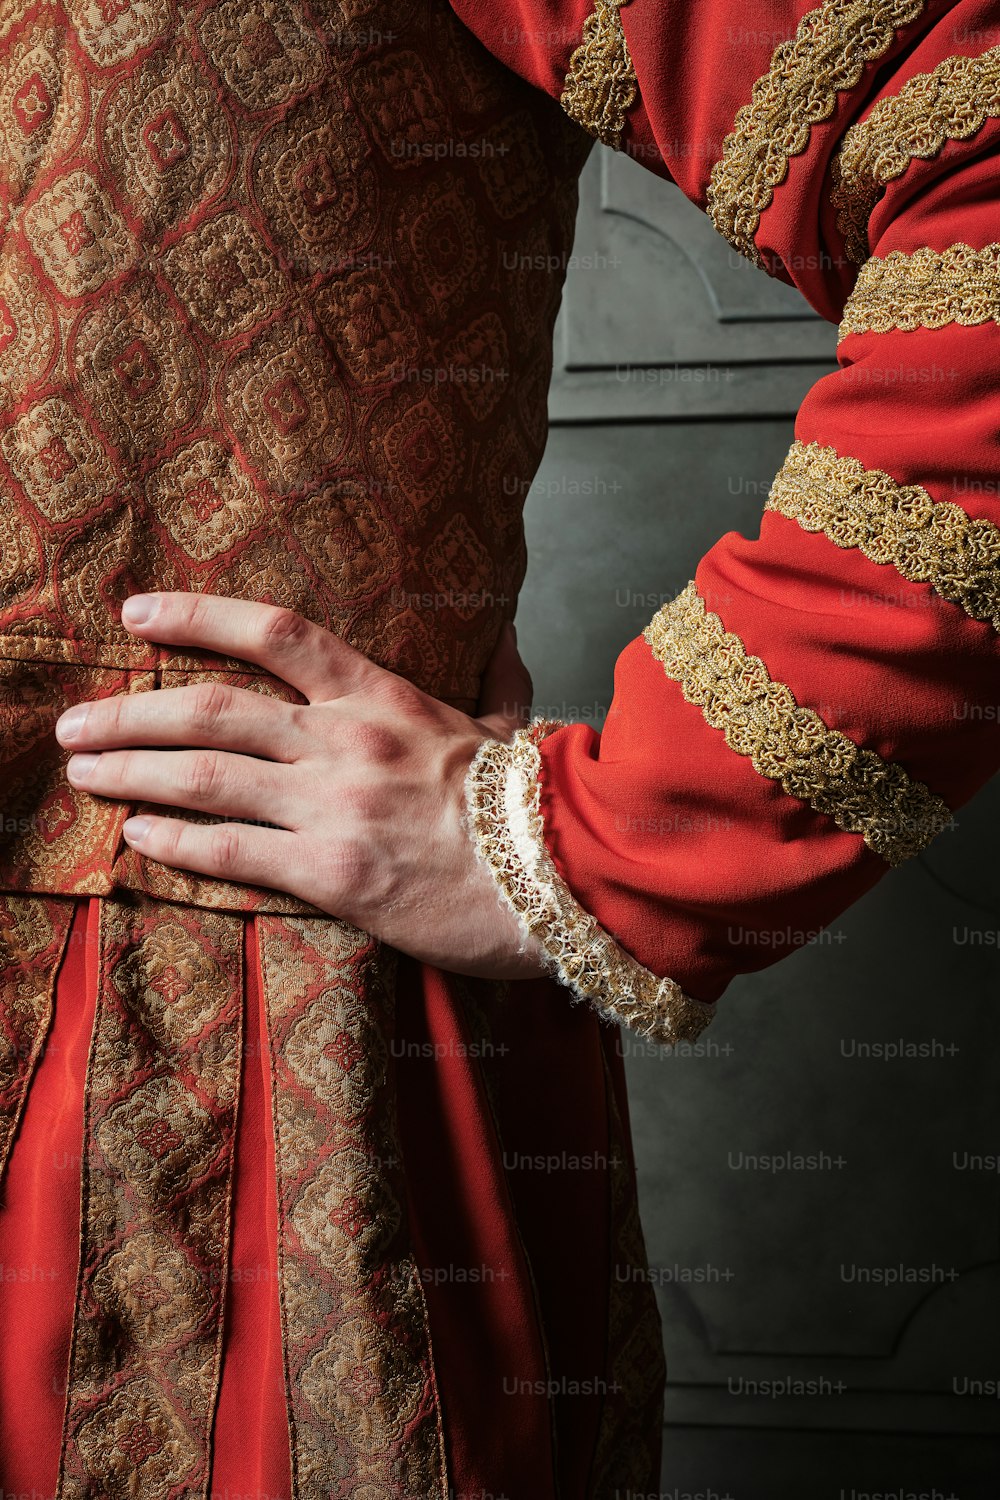 a close up of a person wearing a red and gold dress